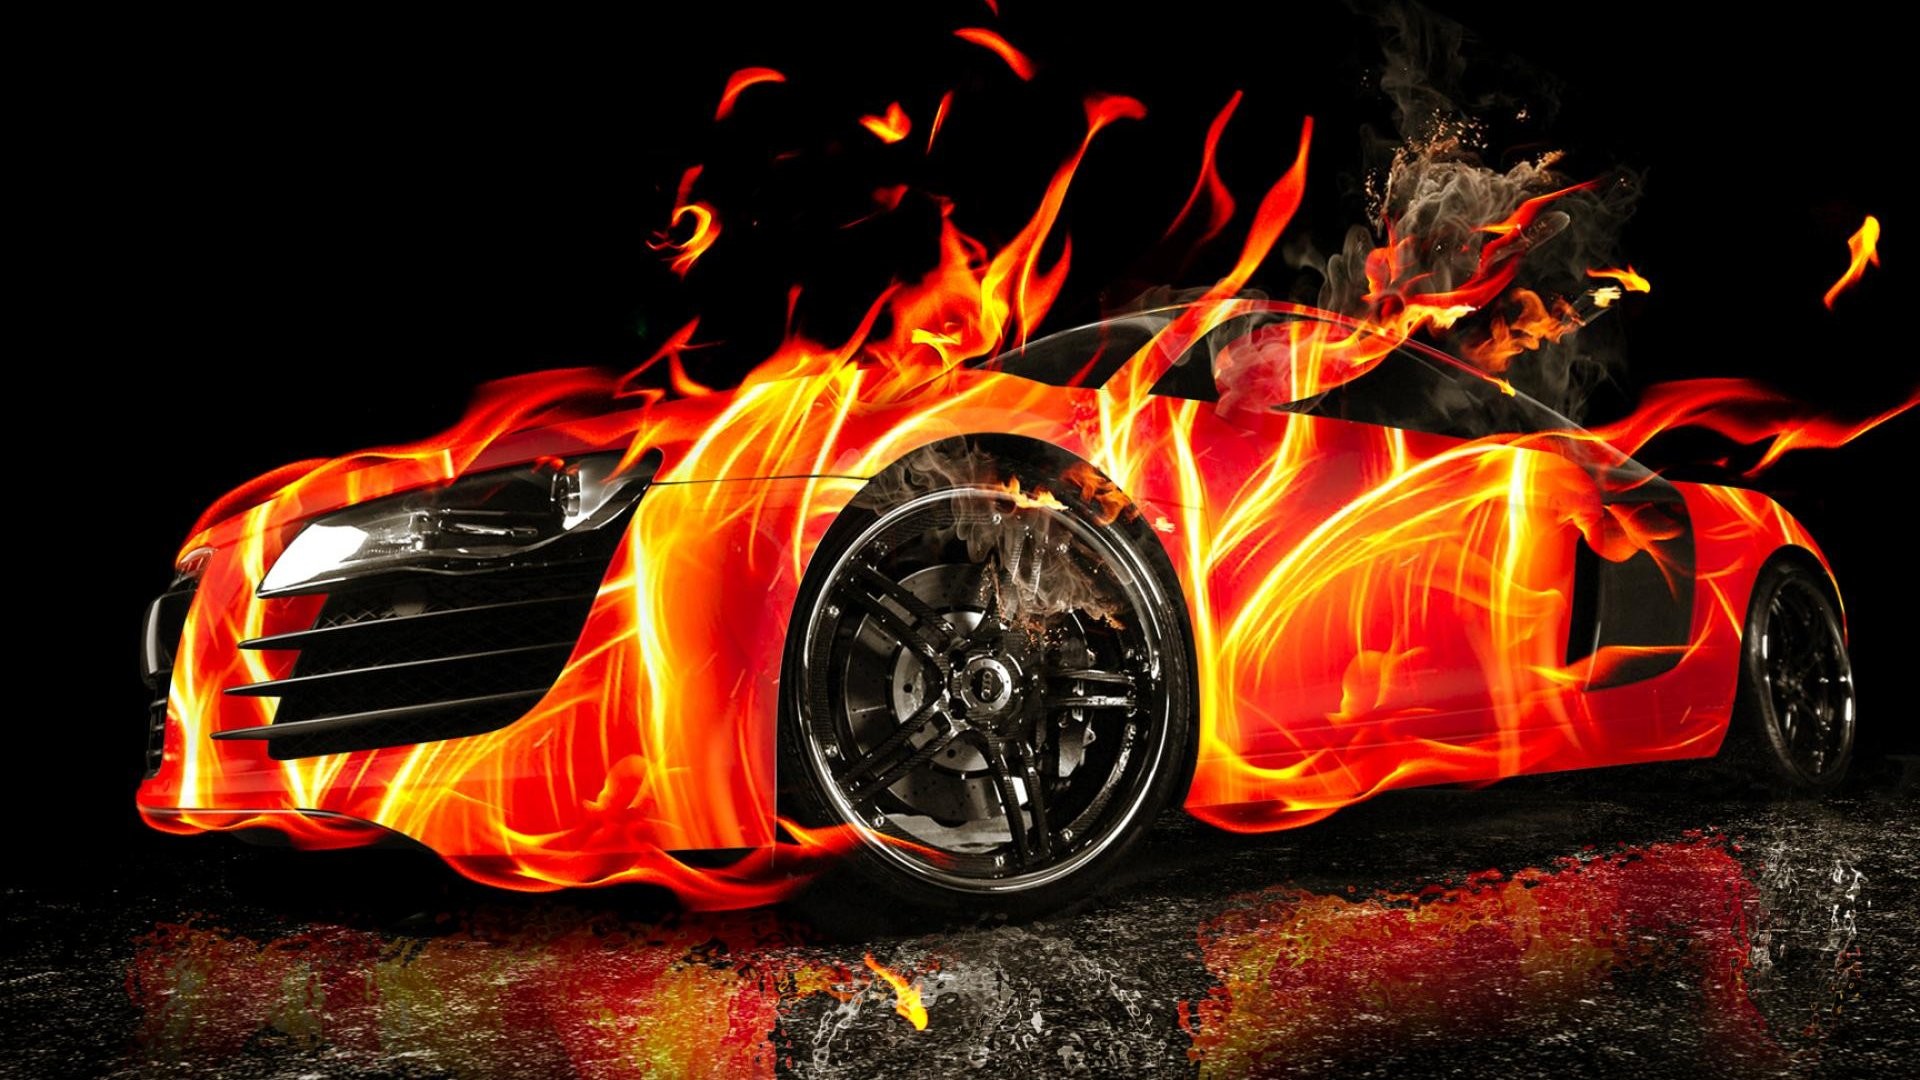 1920x1080 Search Results for “cool fire car wallpaper” – Adorable Wallpapers